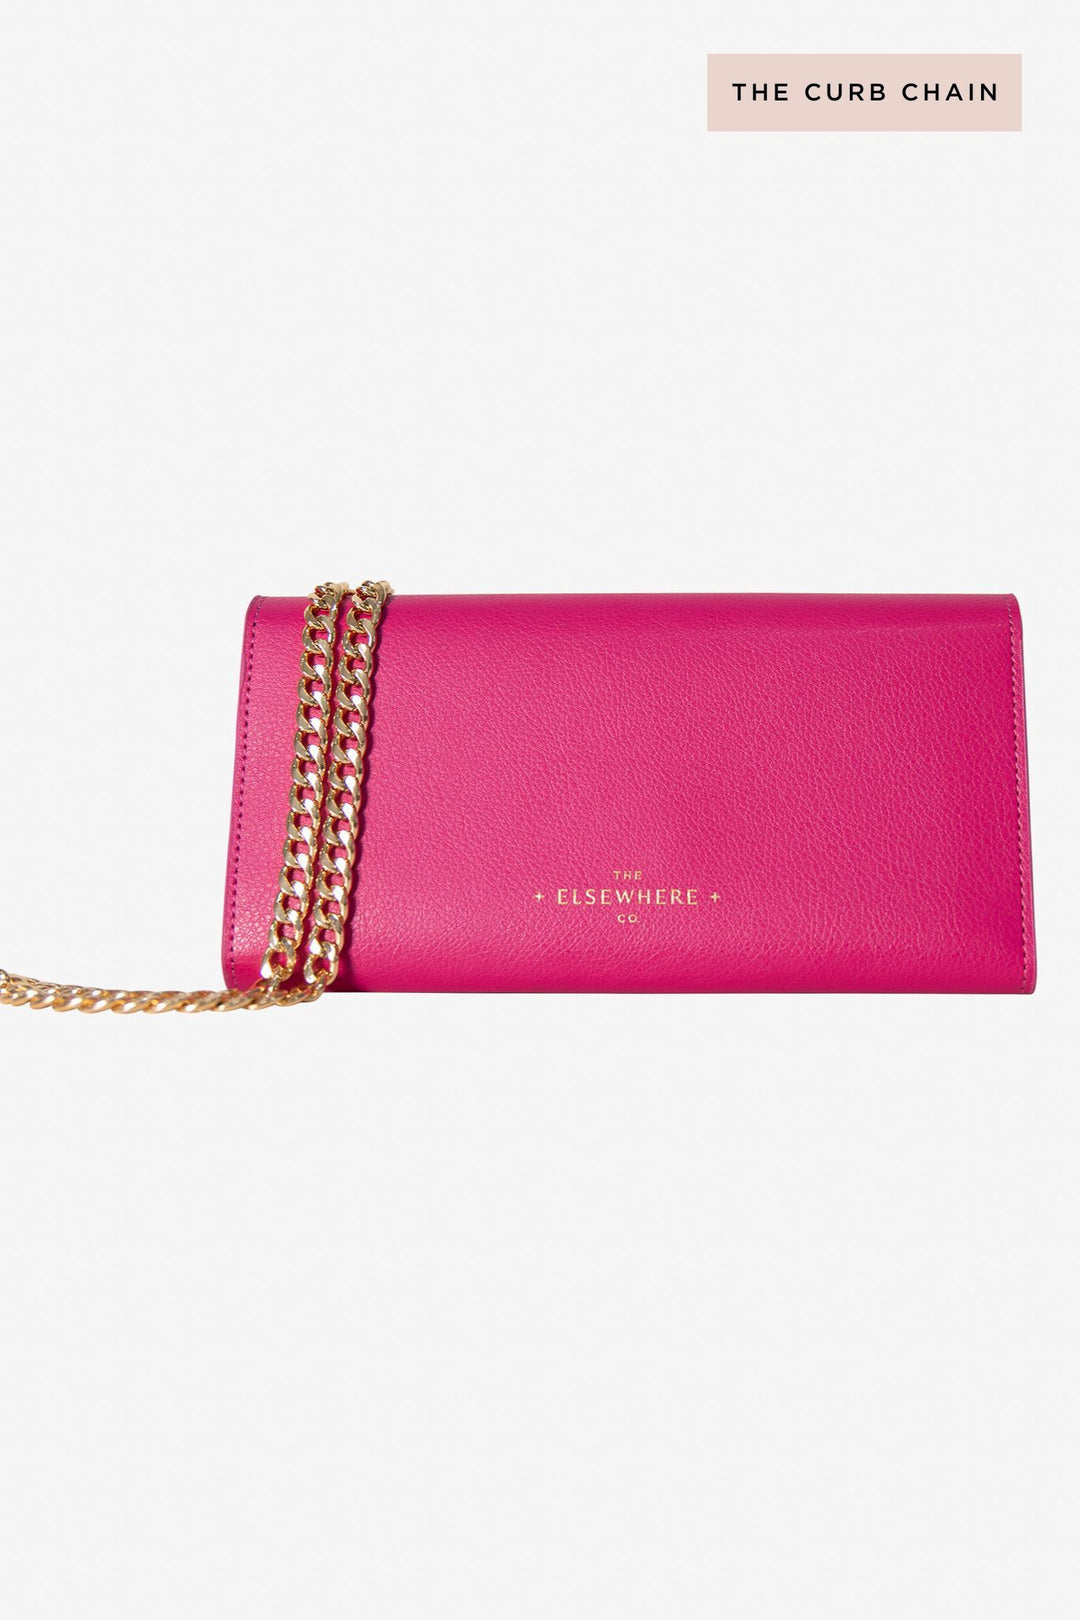 Travel Wallet, Chain + Charm Set In Paradise Pink